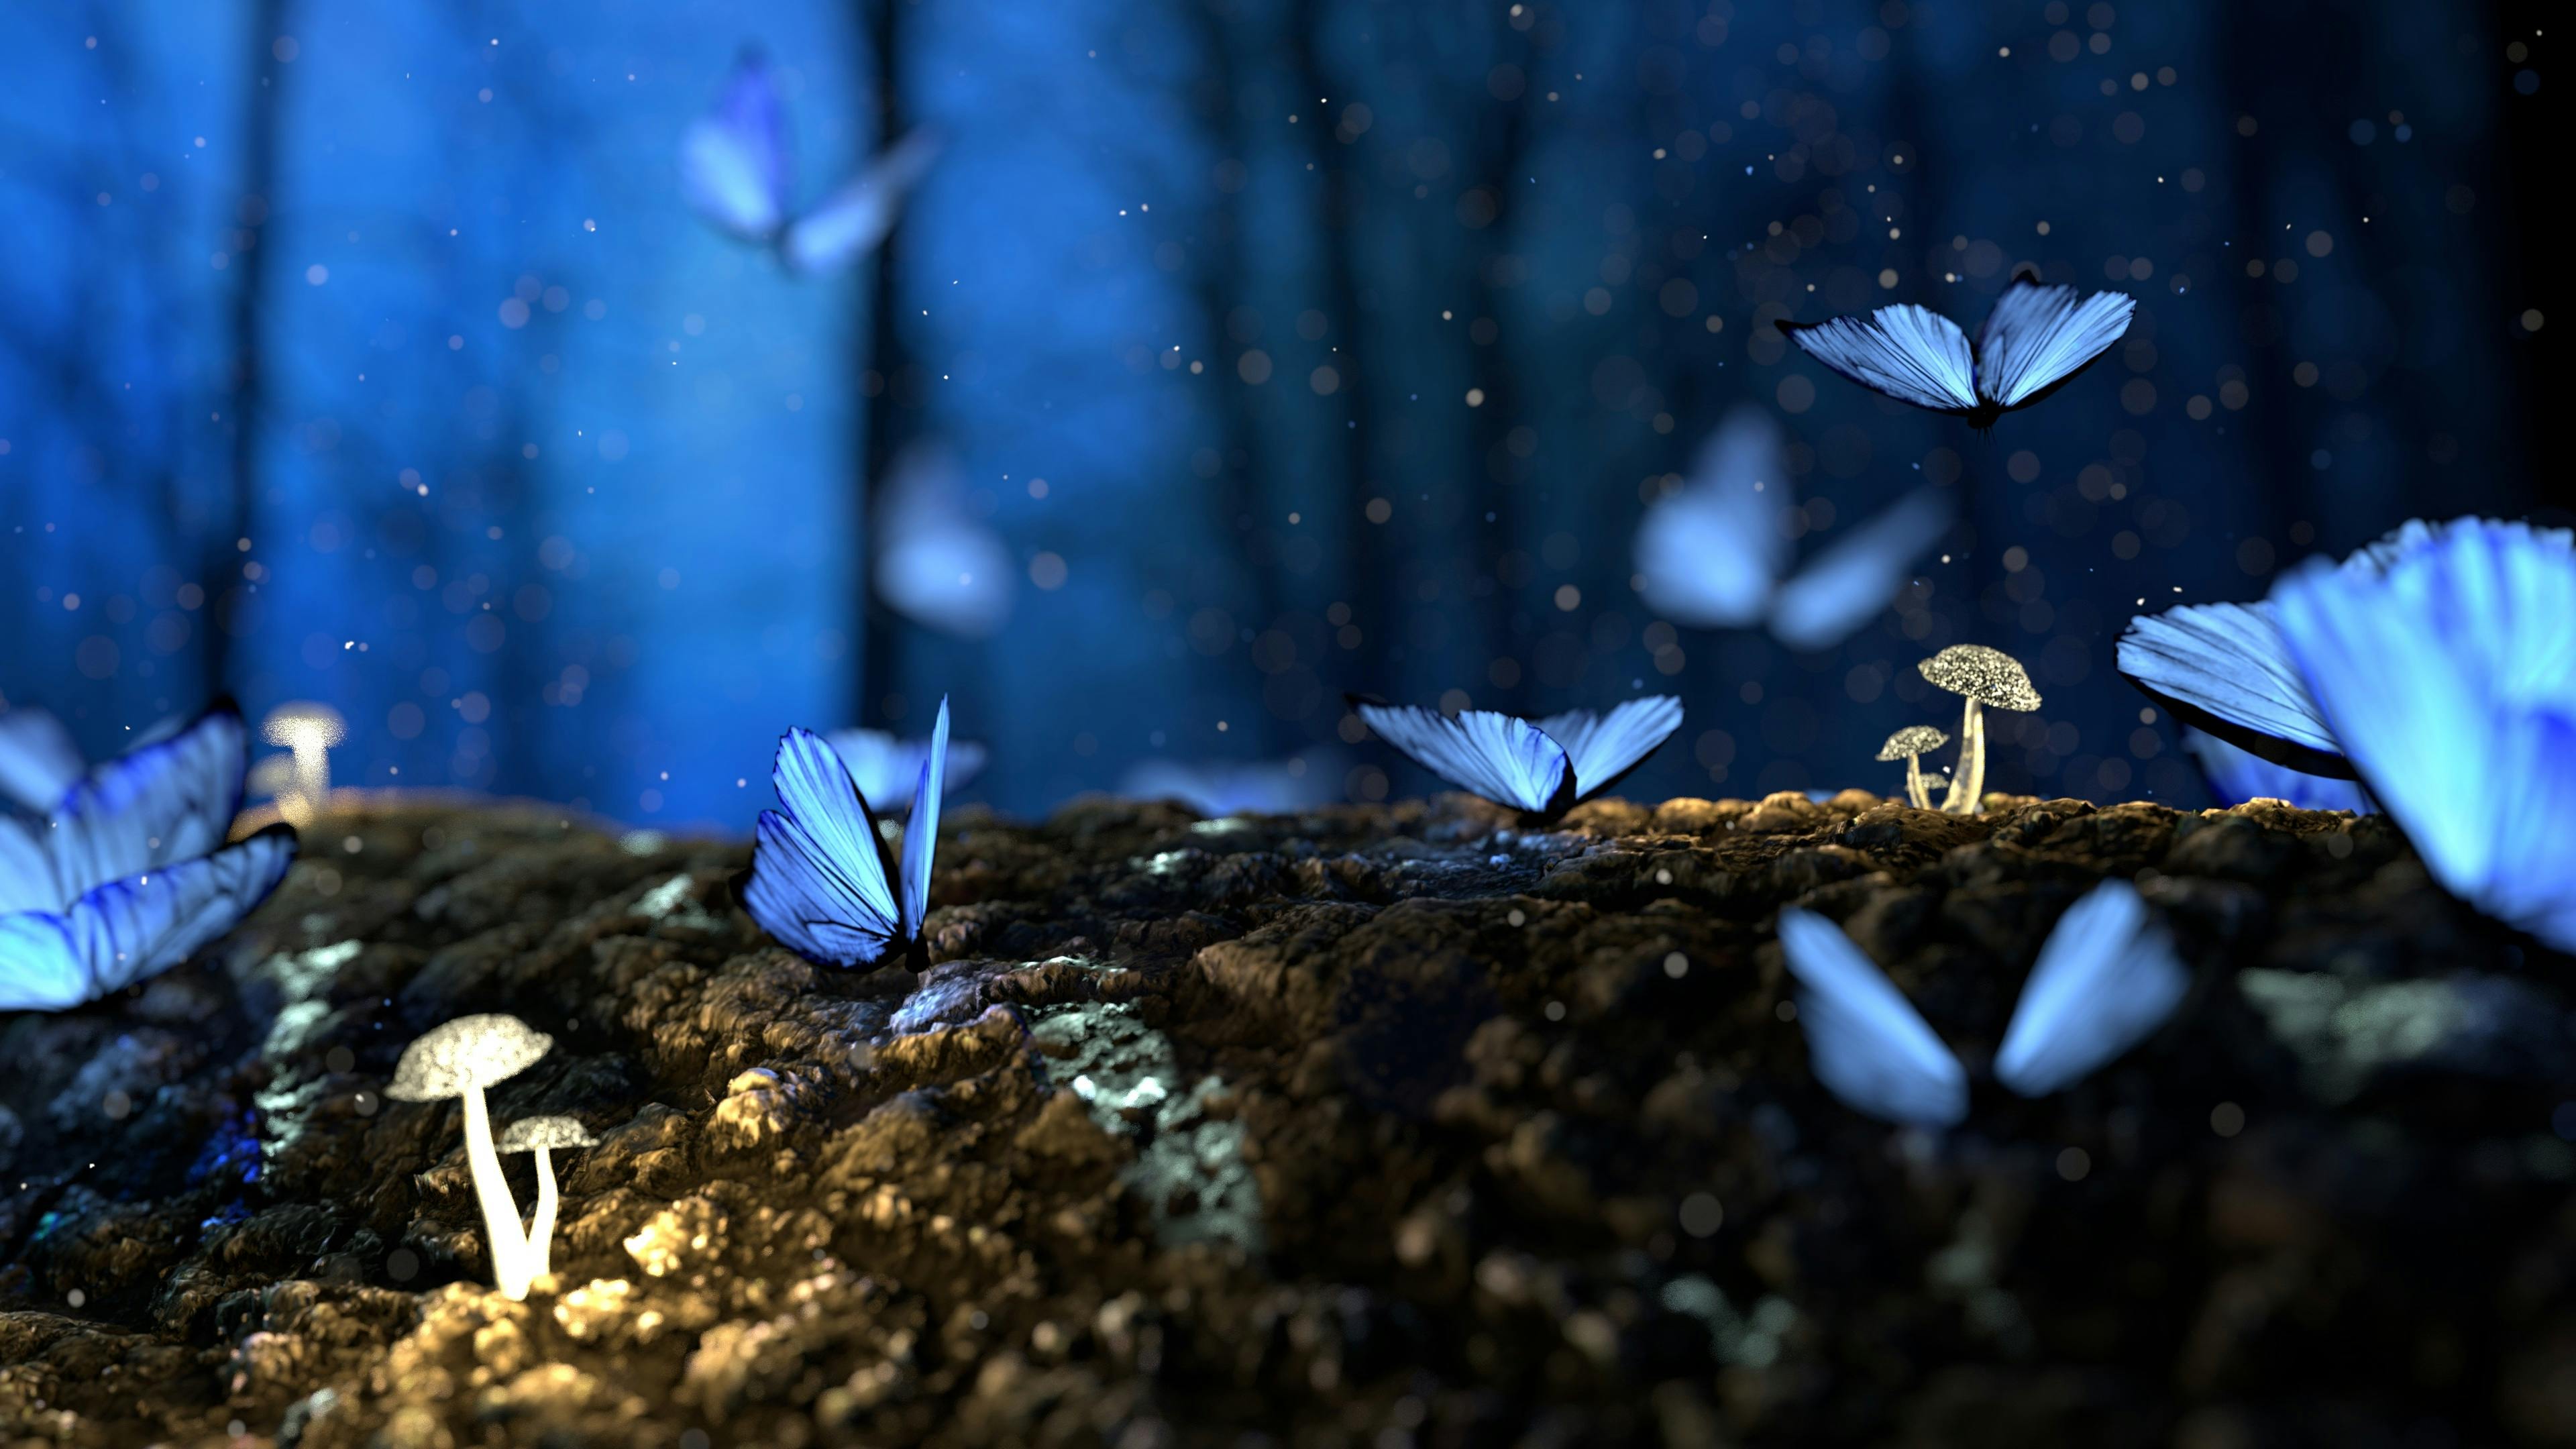 40  Whimsical Butterfly Wallpapers for iPhone  The Mood Guide